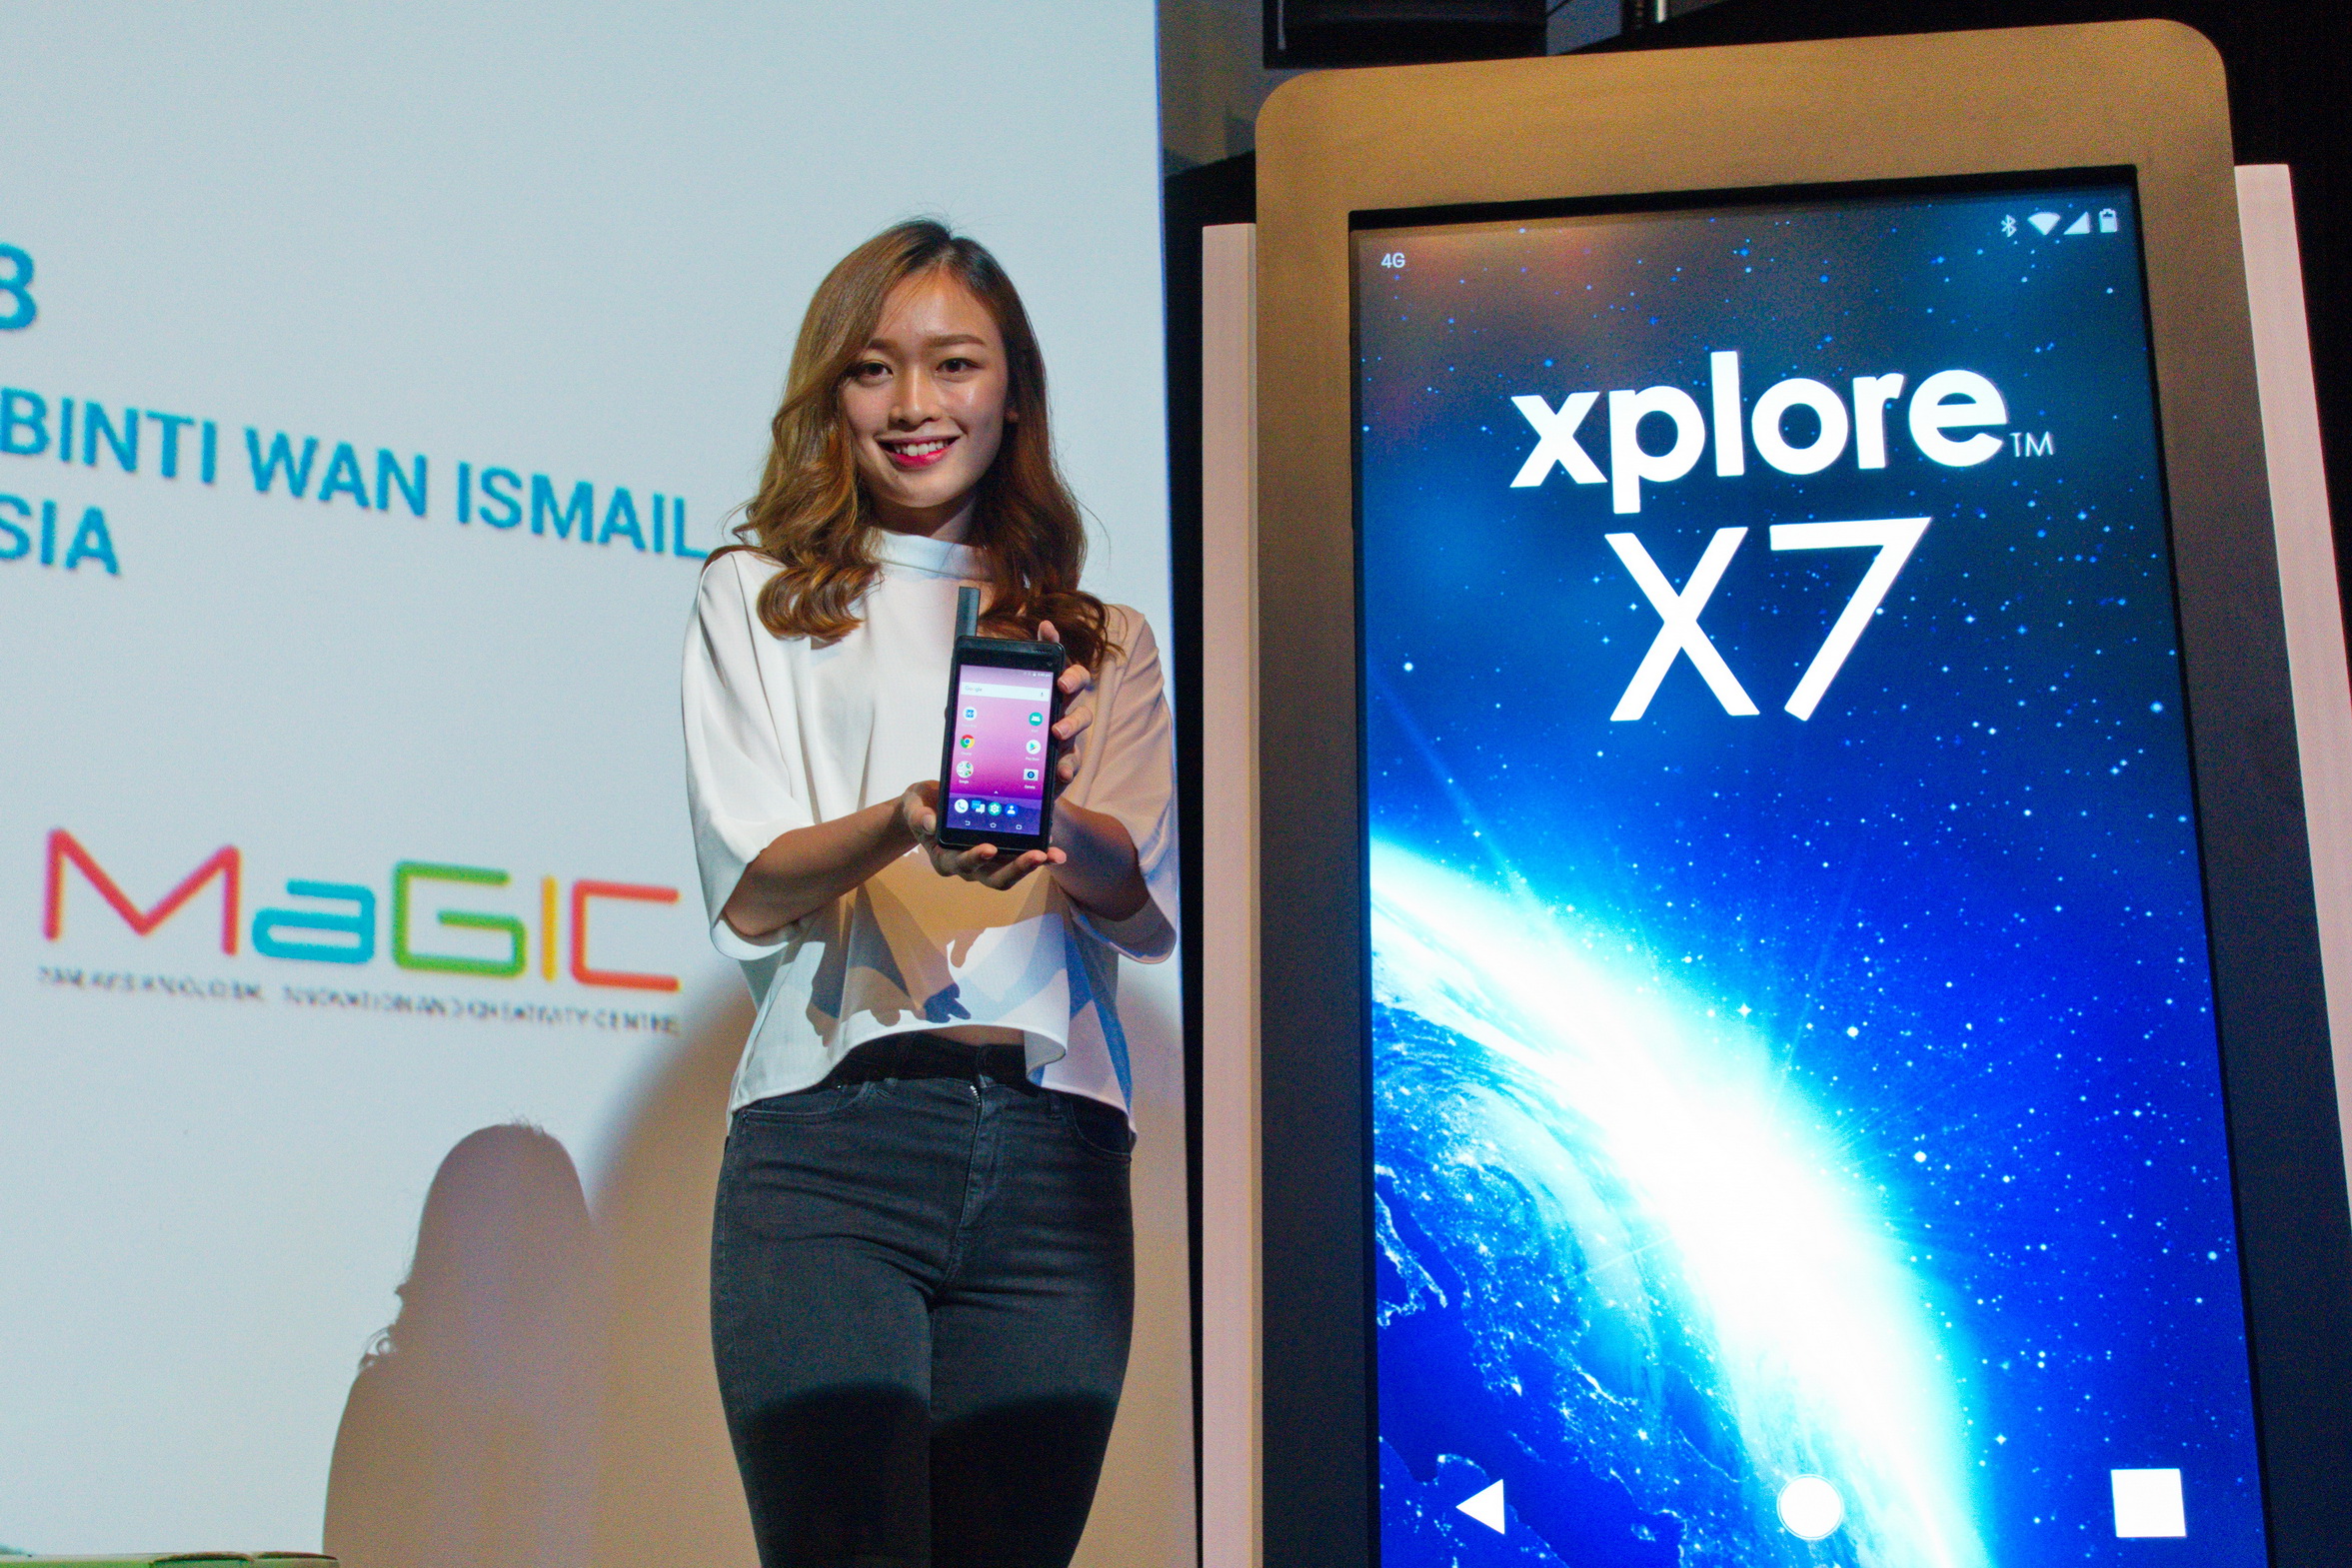 Advancetc Group introduces world’s first Android satellite smartphone the Xplore X7 